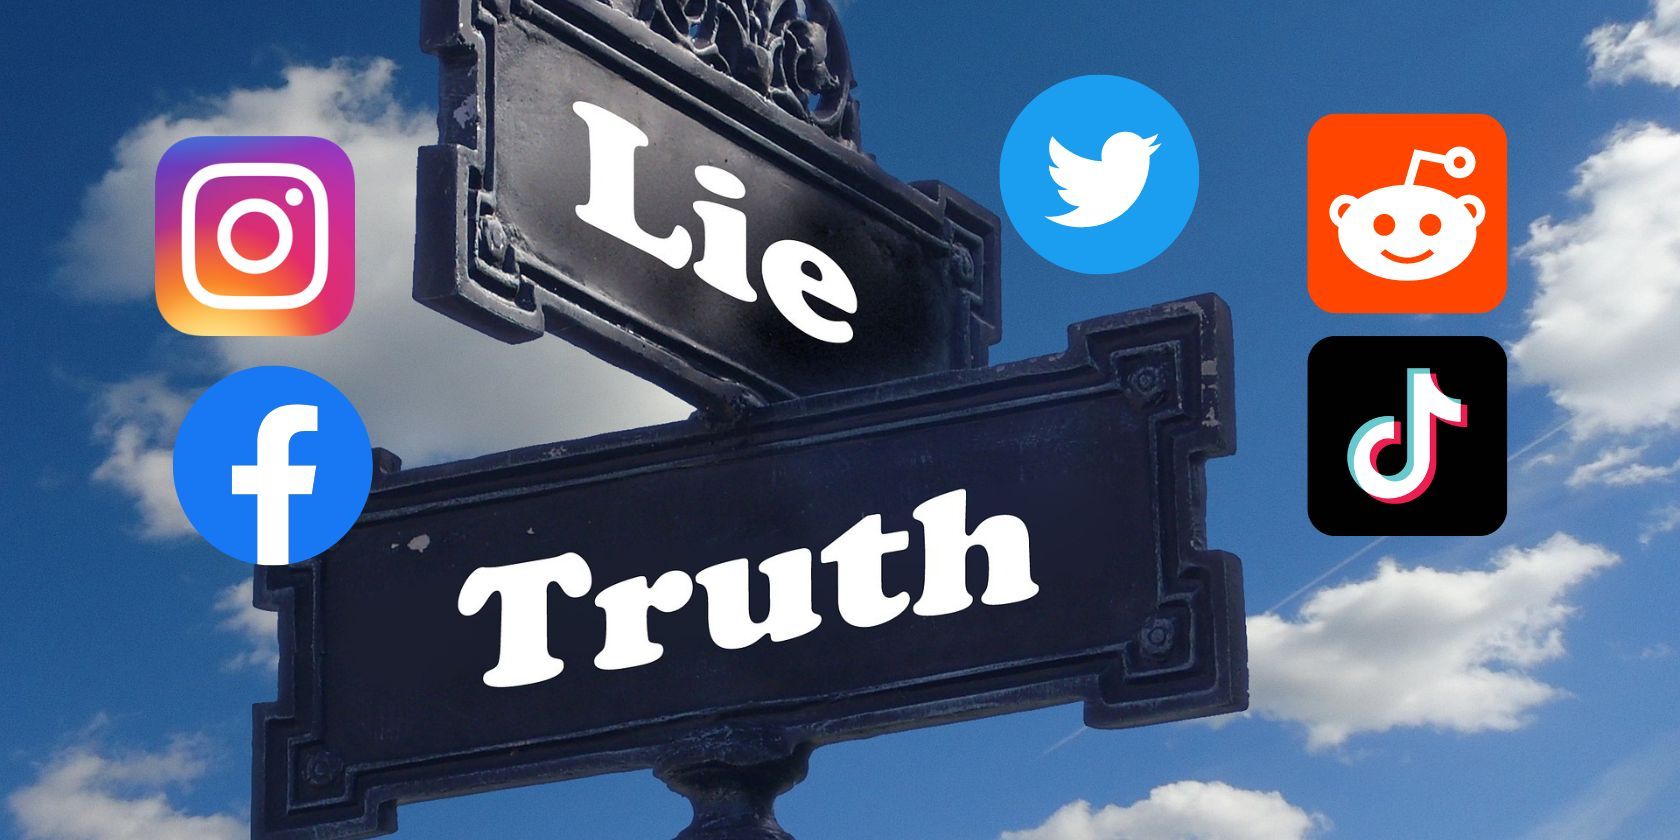 Signs saying Lie and Truth with various social media logos superimposed around them